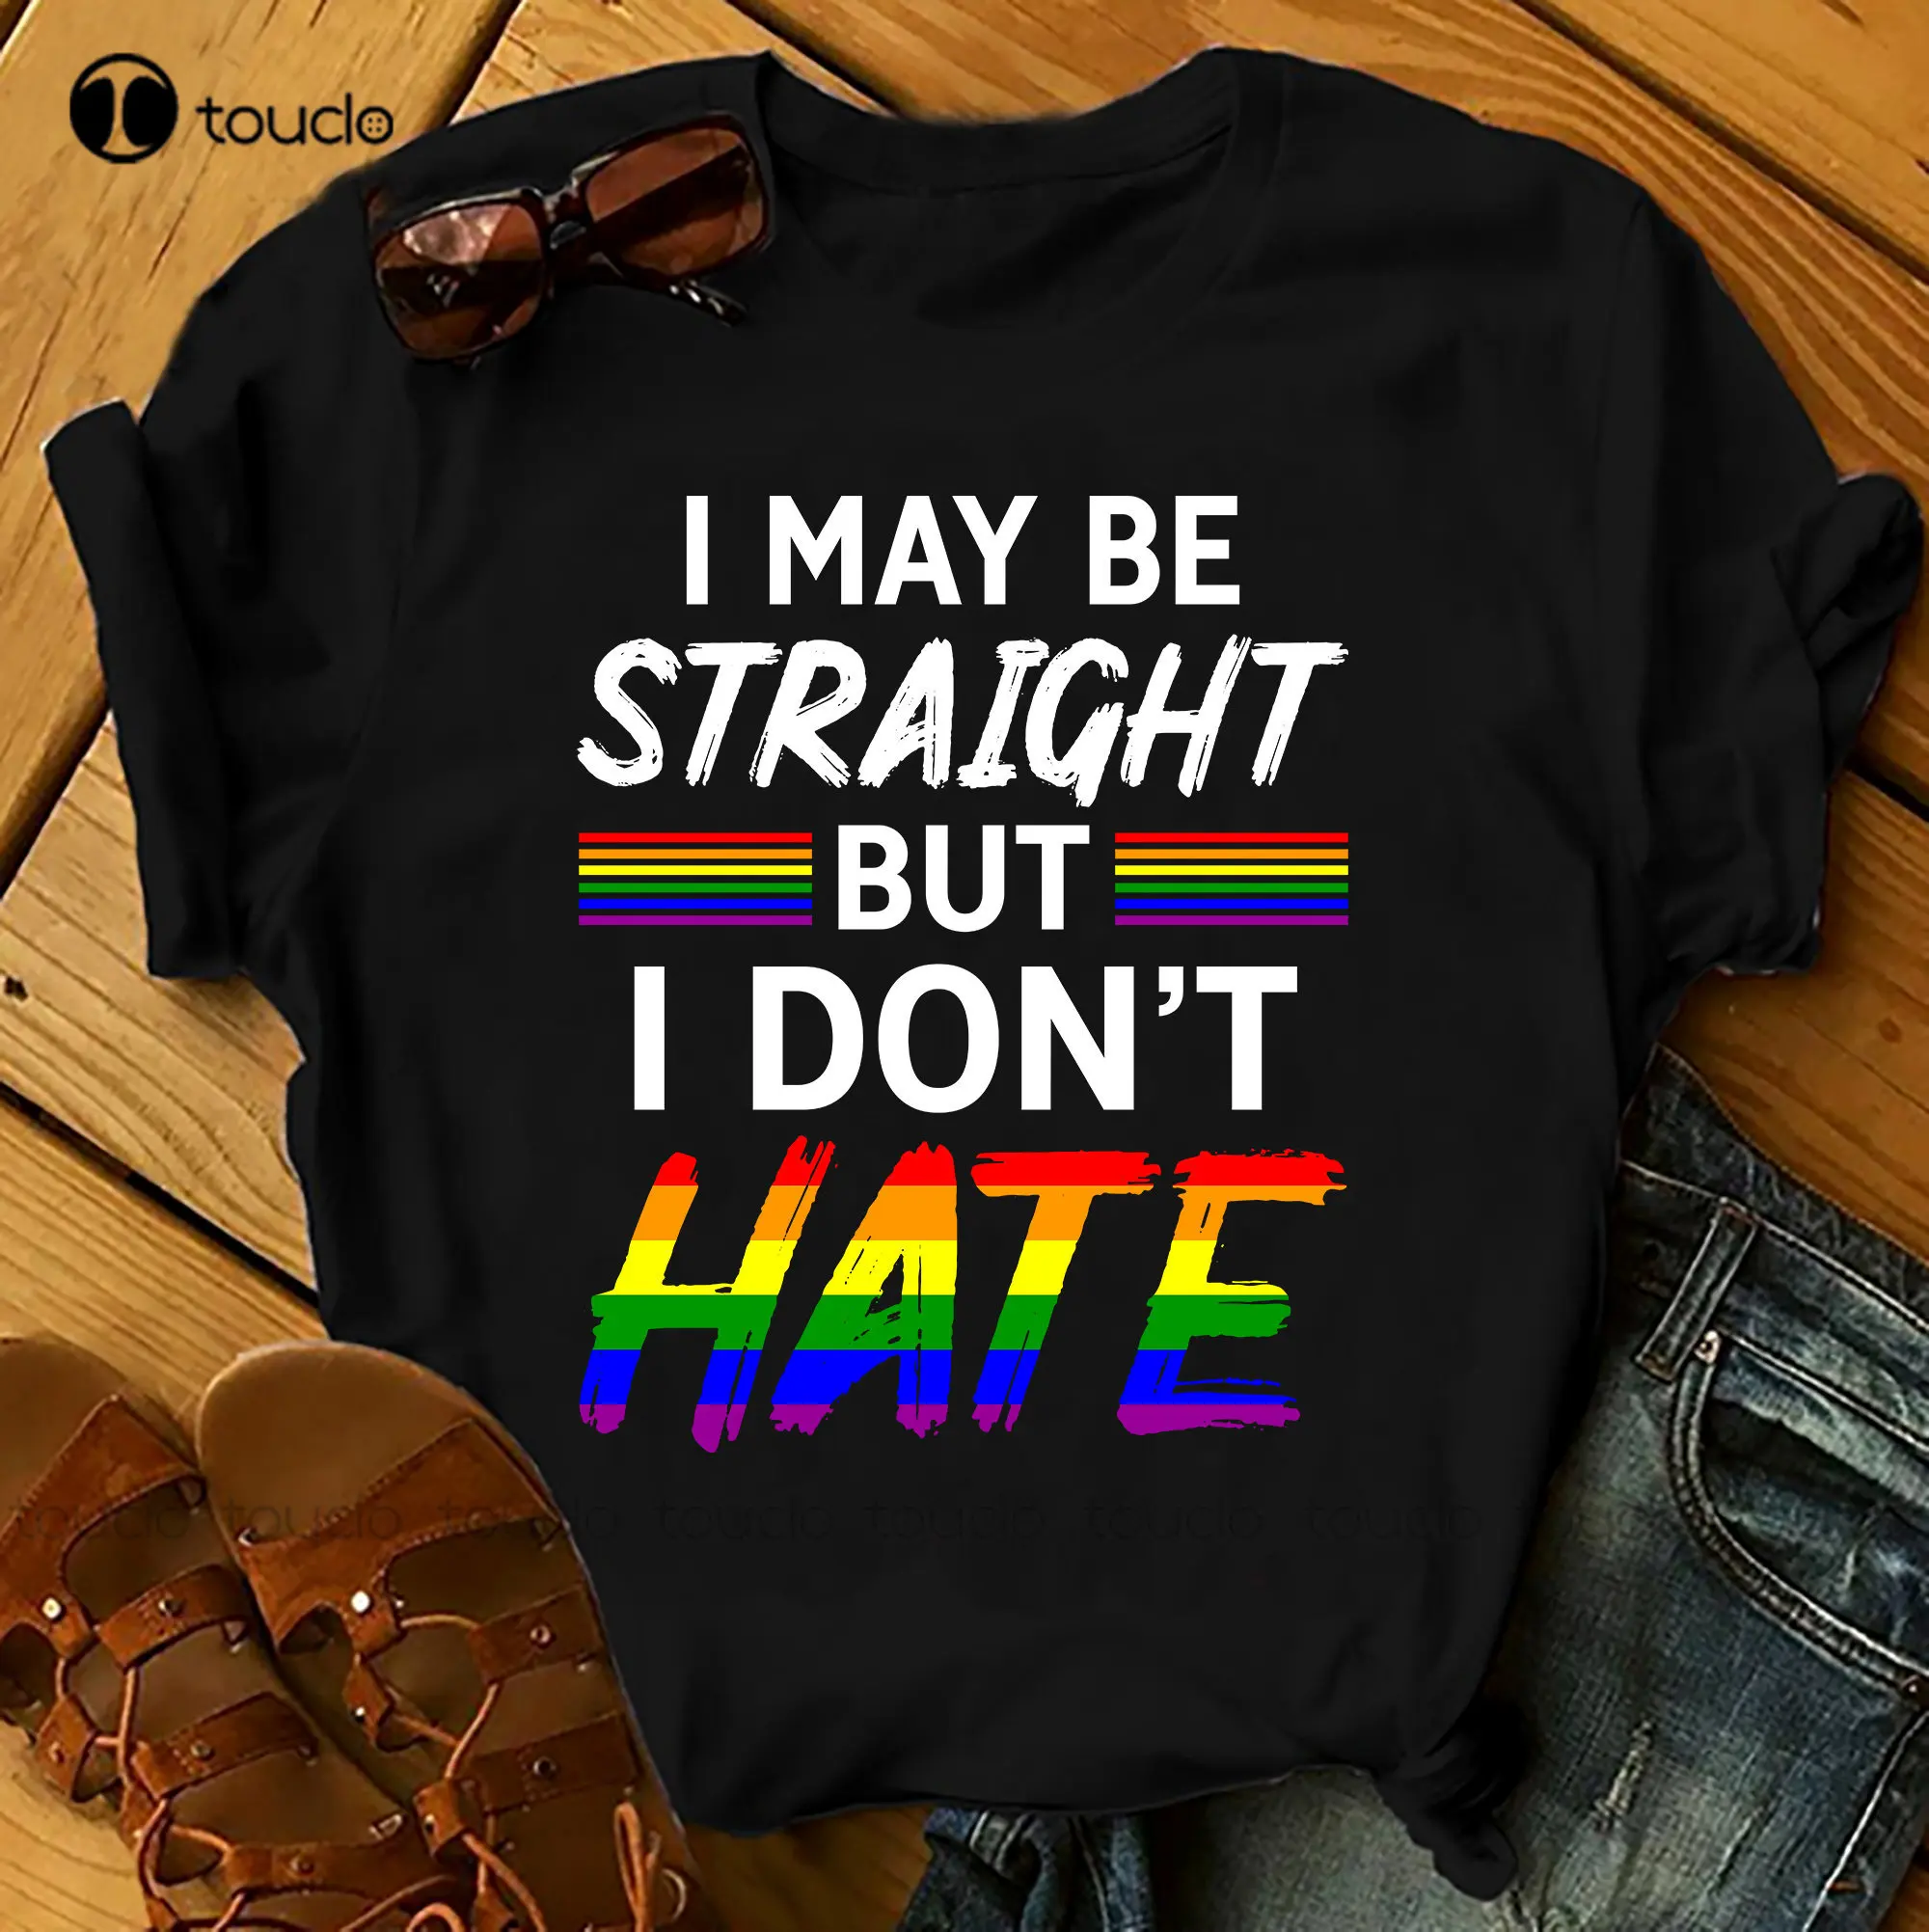 

I May Be Straight But I Don'T Hate - Lgbt Shirts Men Woman Birthday T Shirts Summer Tops Beach T Shirts Xs-5Xl Breathable Cotton